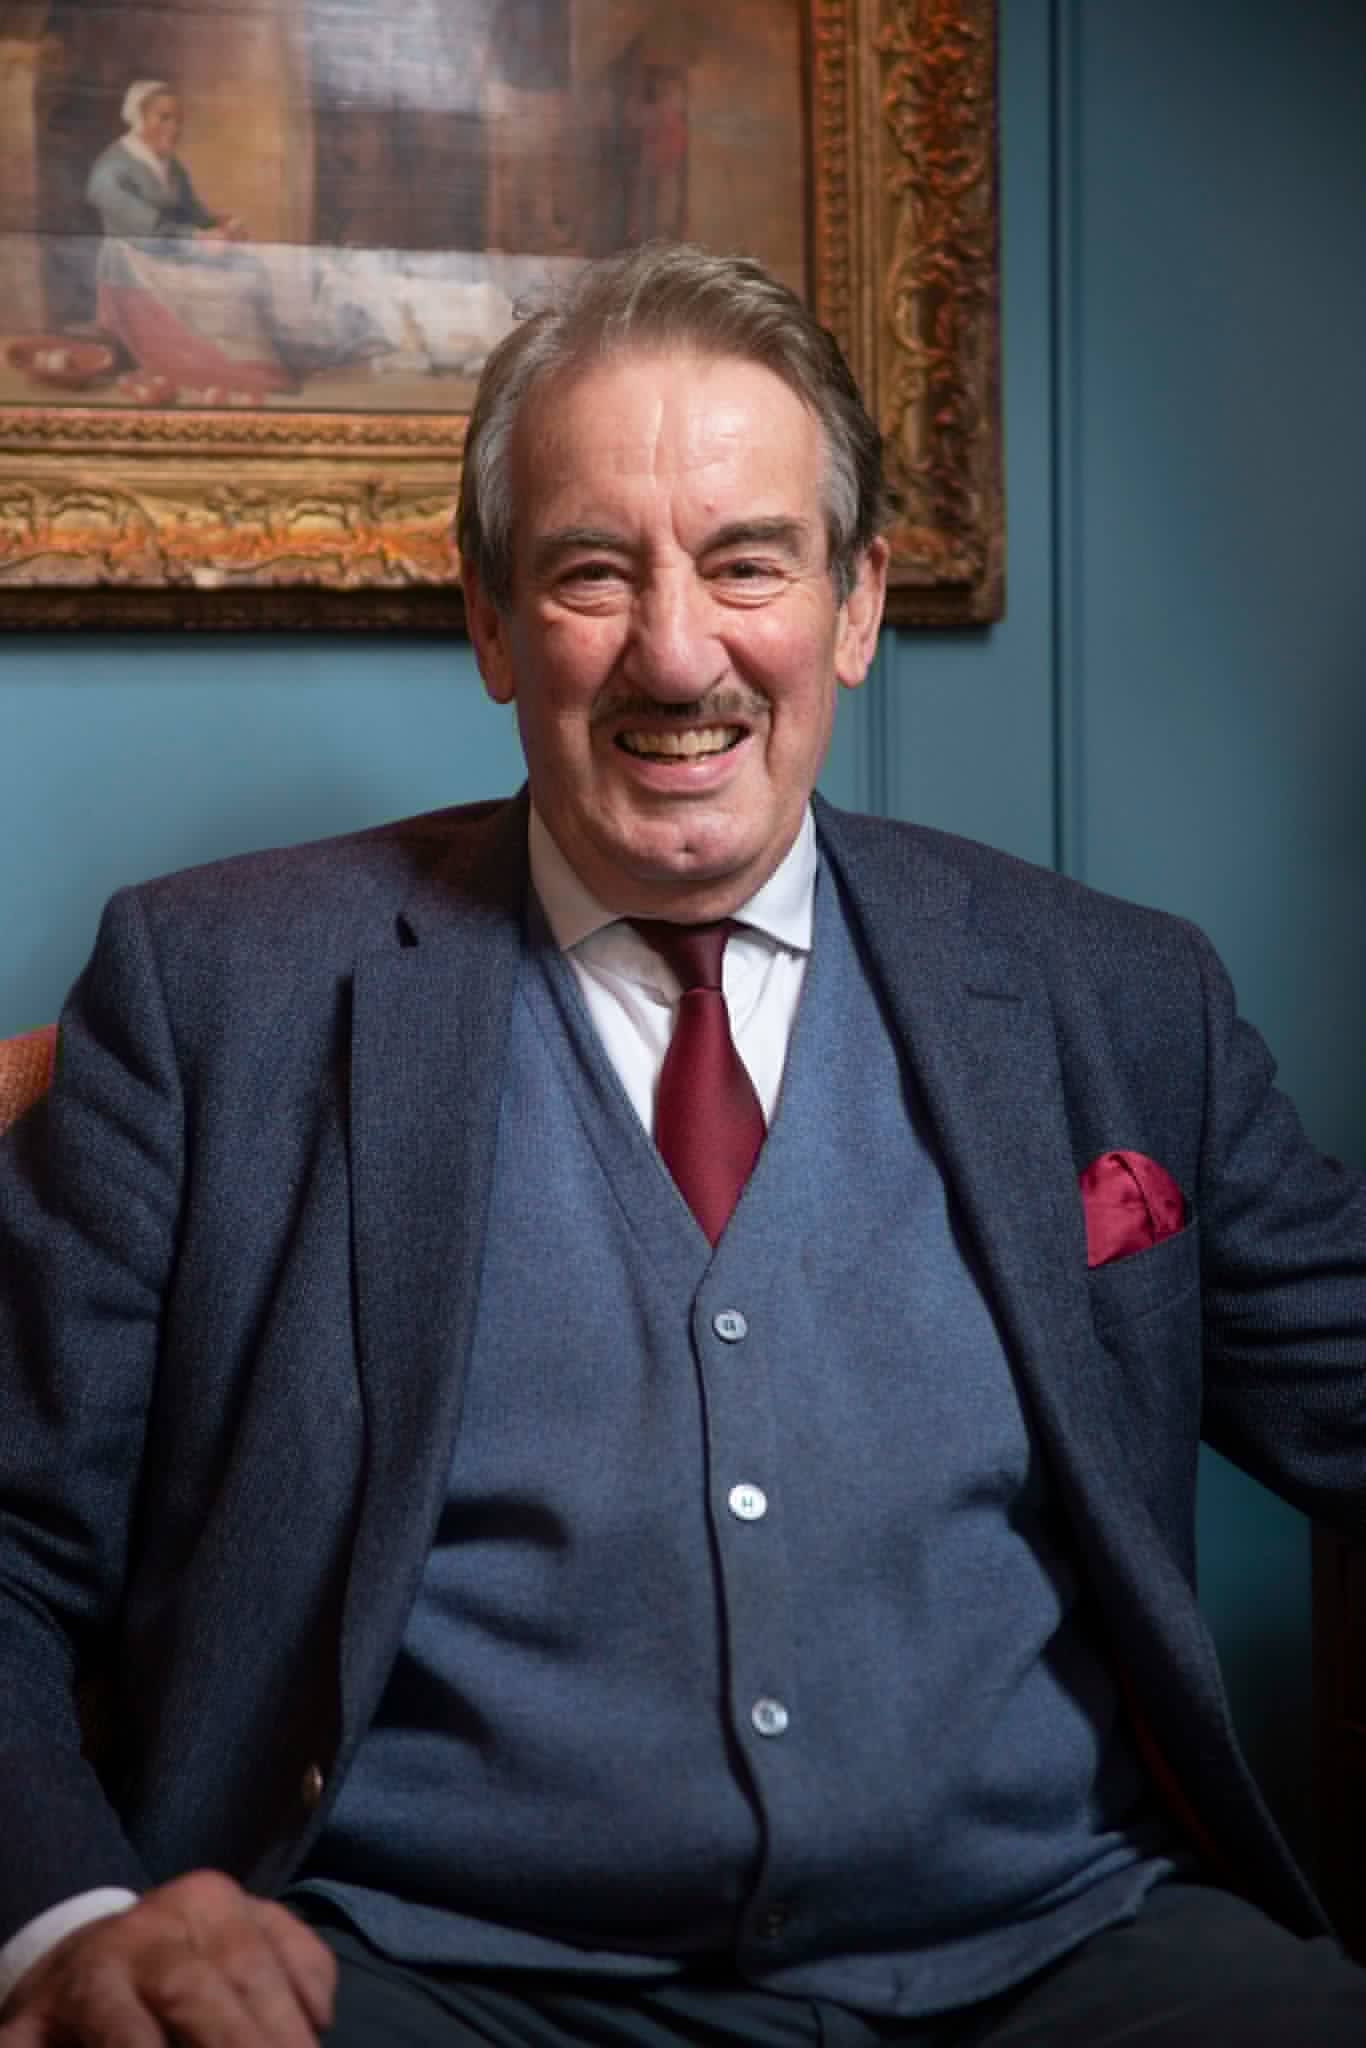 Only Fools and Horses actor John Challis, patron of Kidderminsters Rose Theatre 